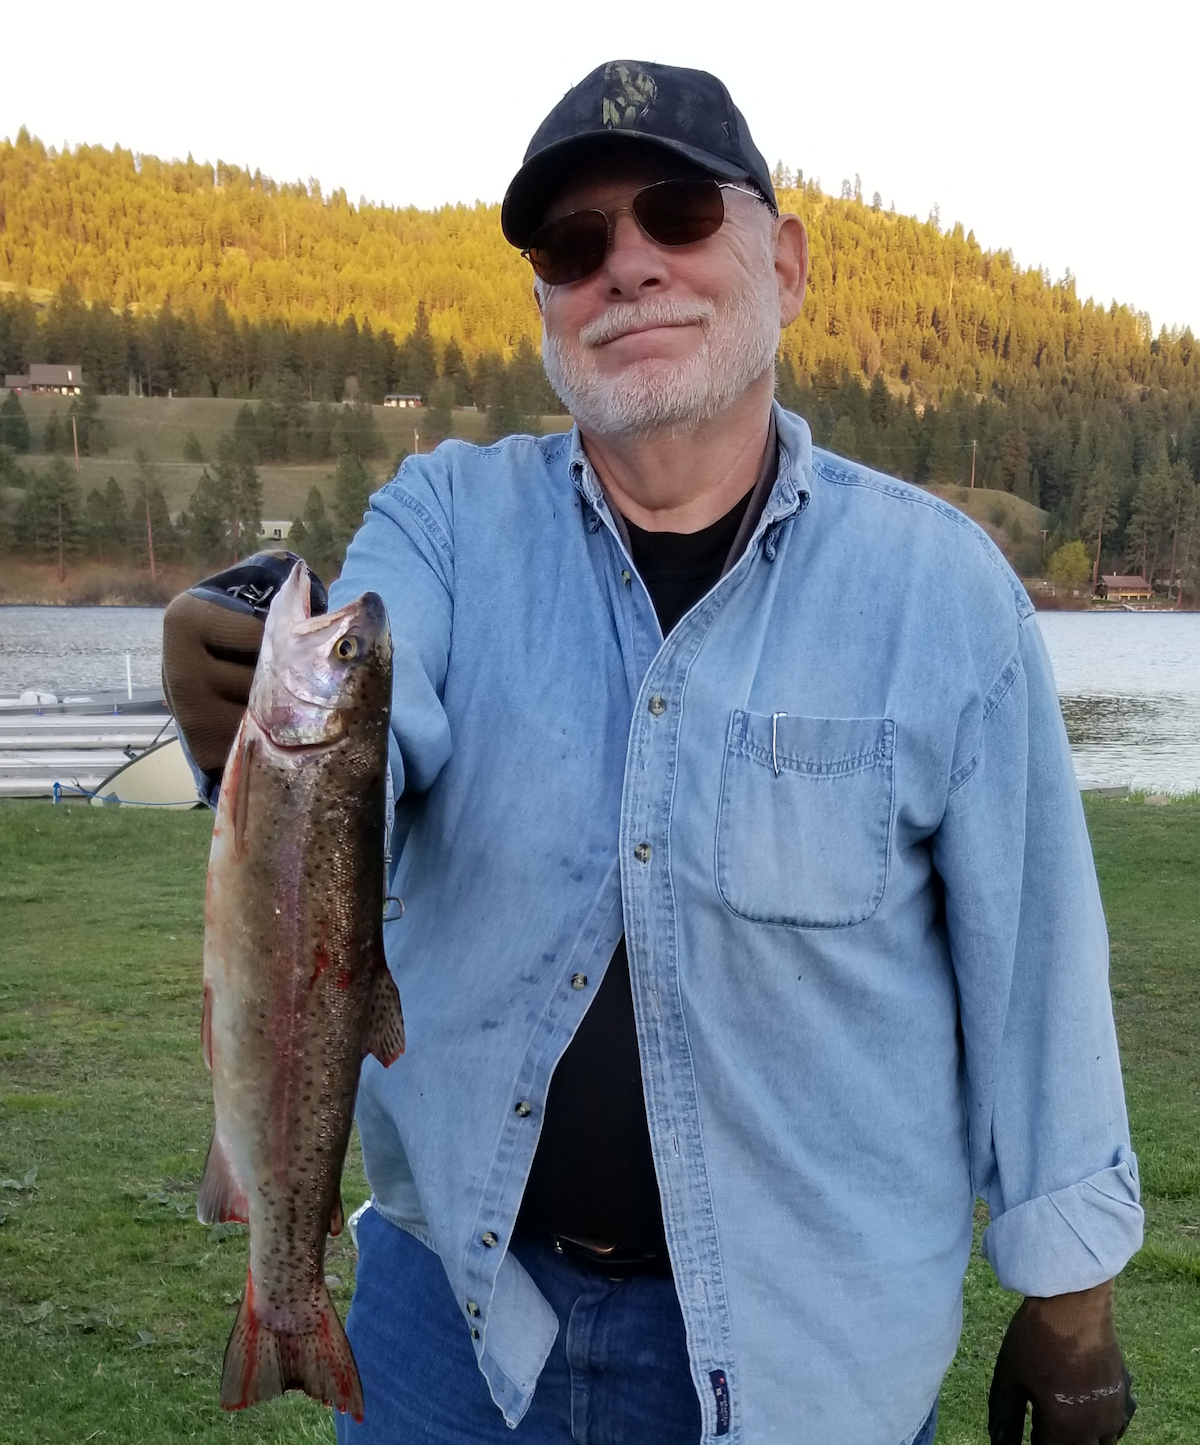 Gloyd Dearth won the prize for biggest fish at the 2019 Fishing Rally